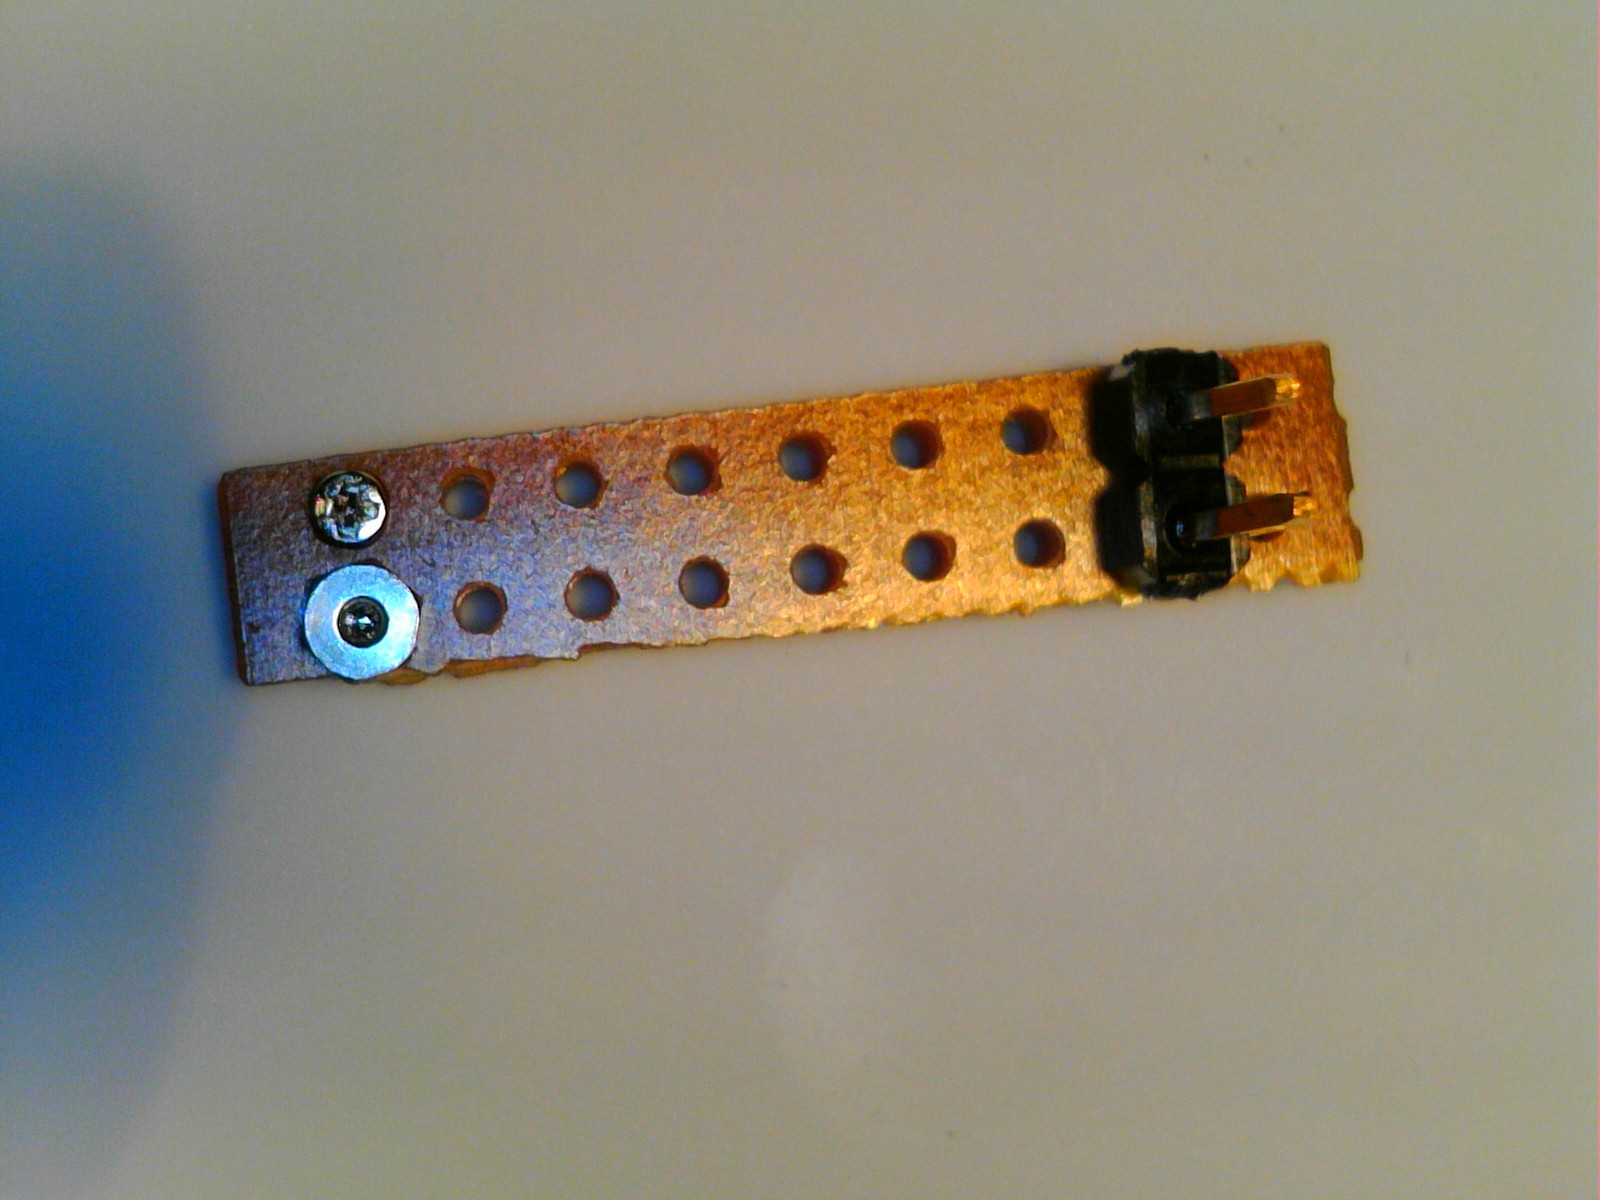 a view of the generation 2 print head from the front, showing the two clamp screws, the unmetallized back side of the strip board that makes up the body, and the two, 0.1" header pins for connection to power and ground, for the single heater in this device